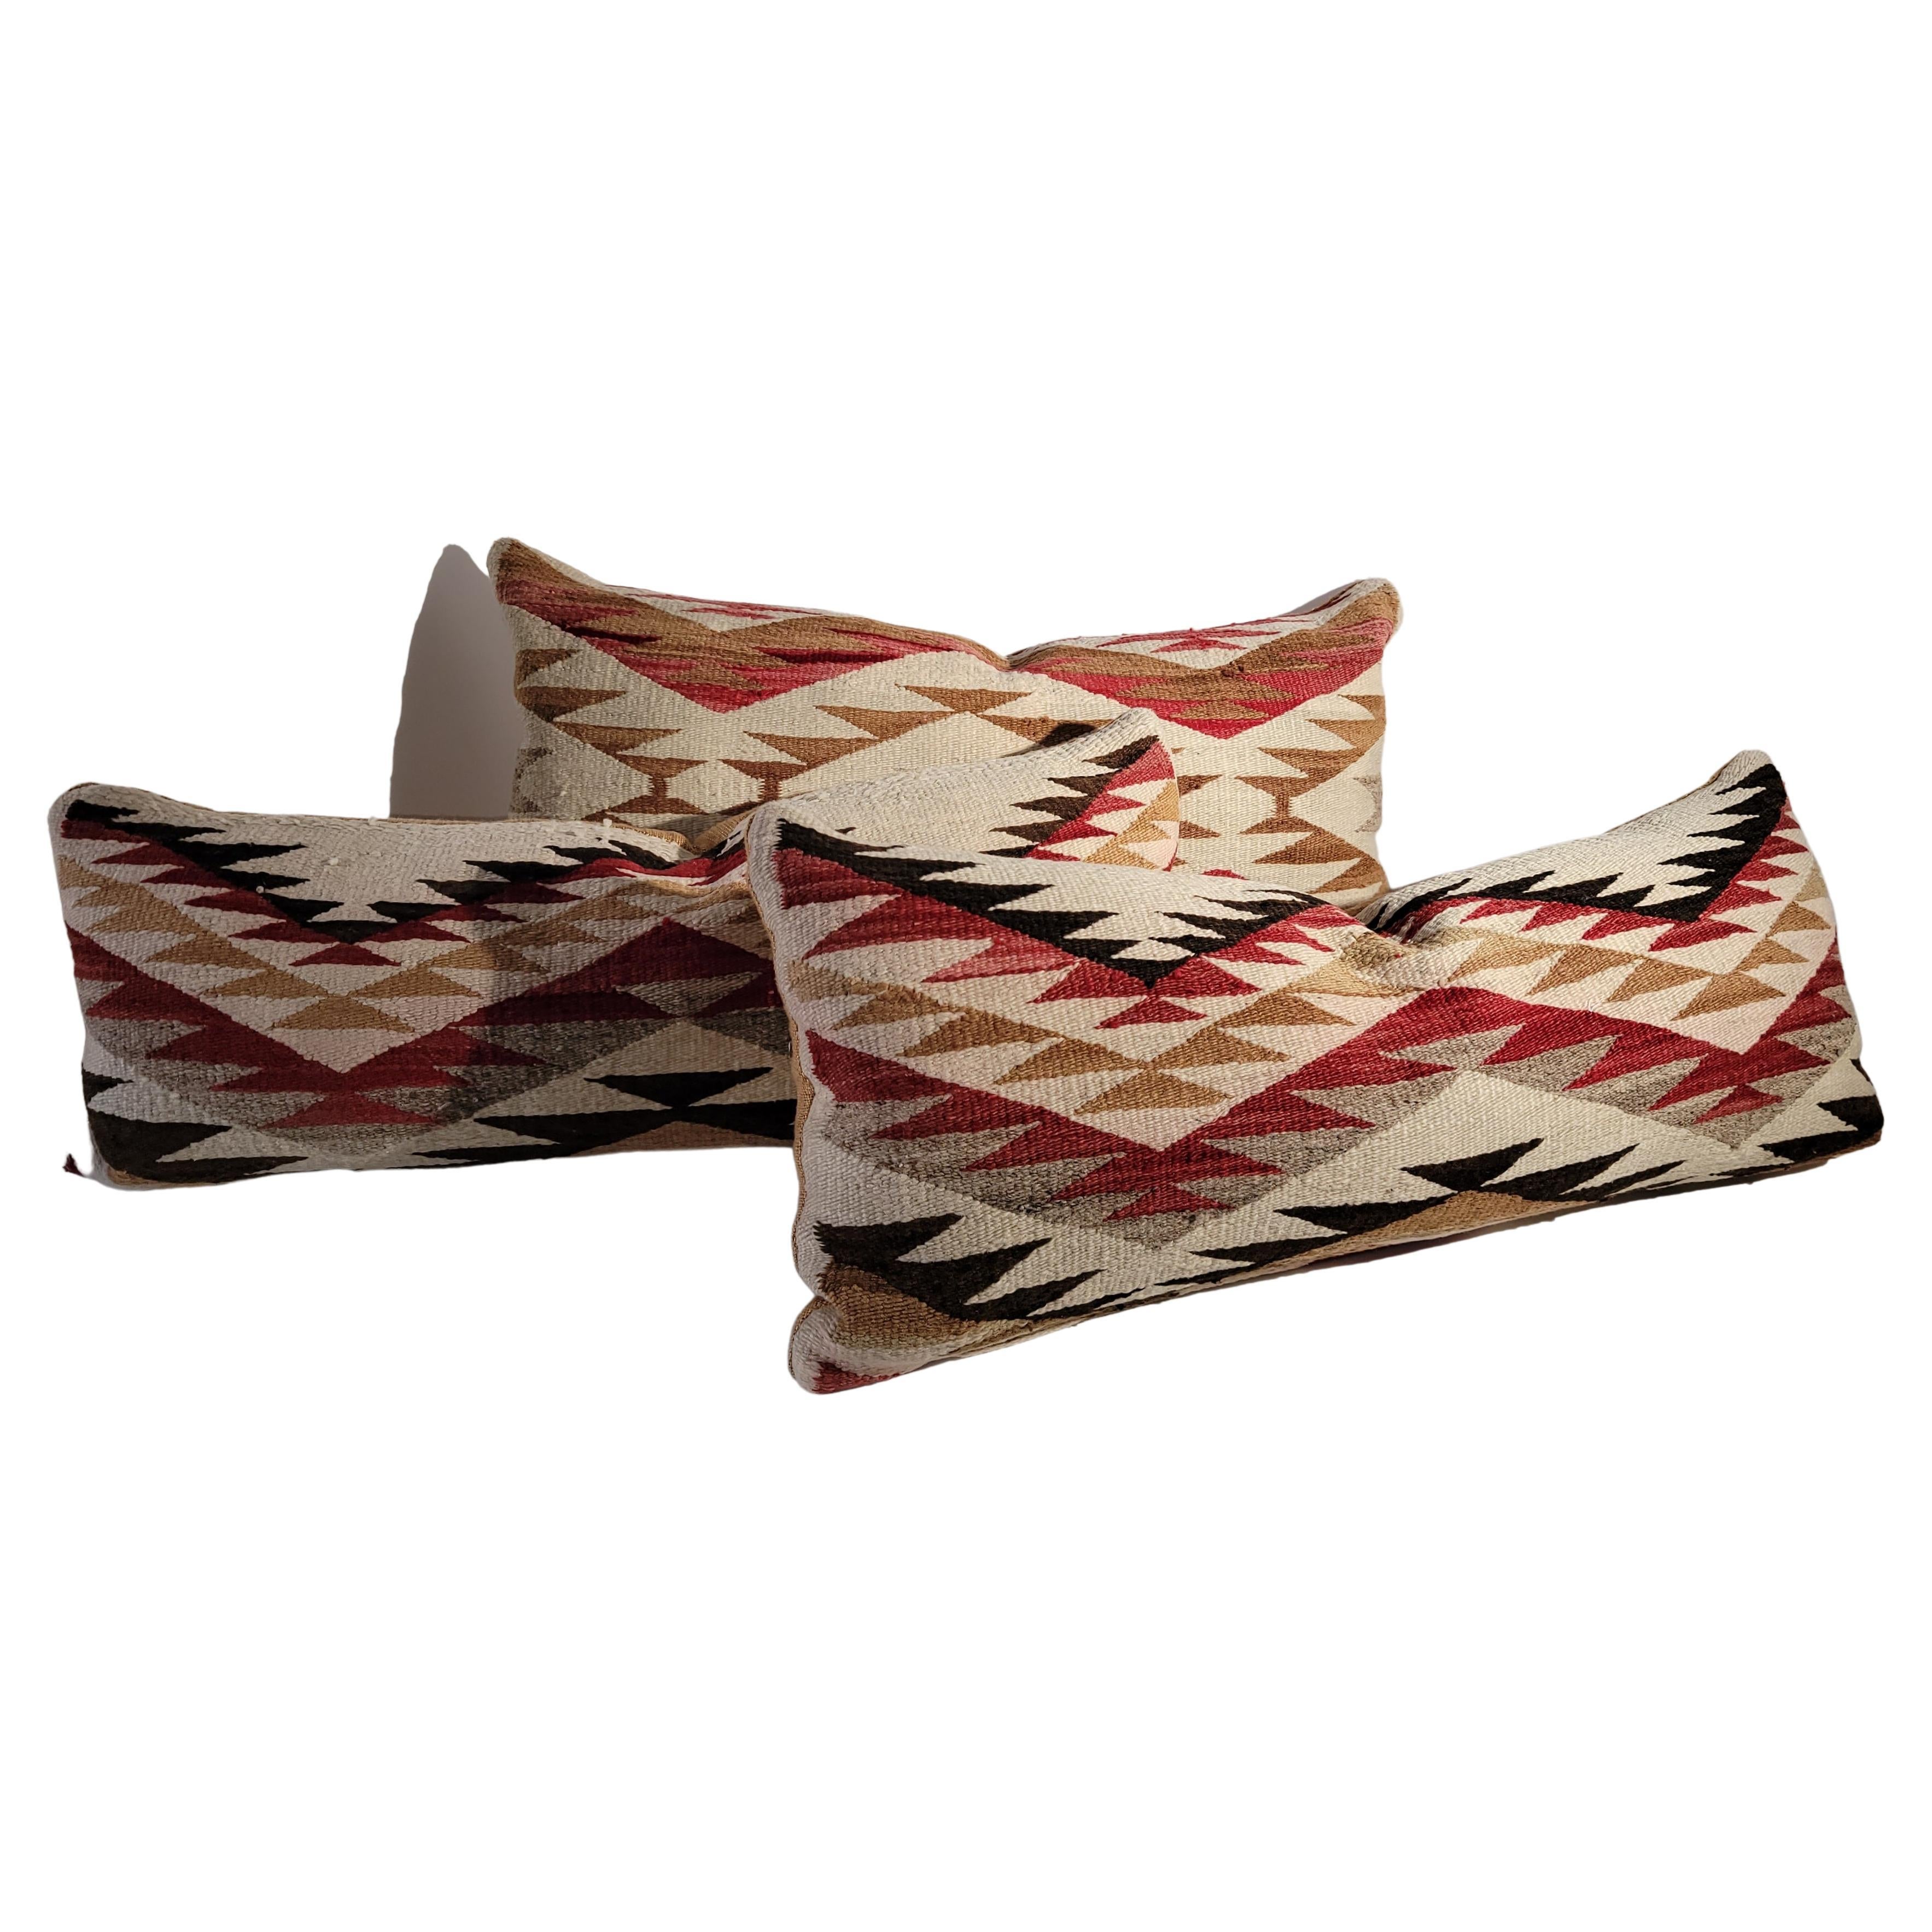  Navajo Indian Weaving Bolster Pillows For Sale